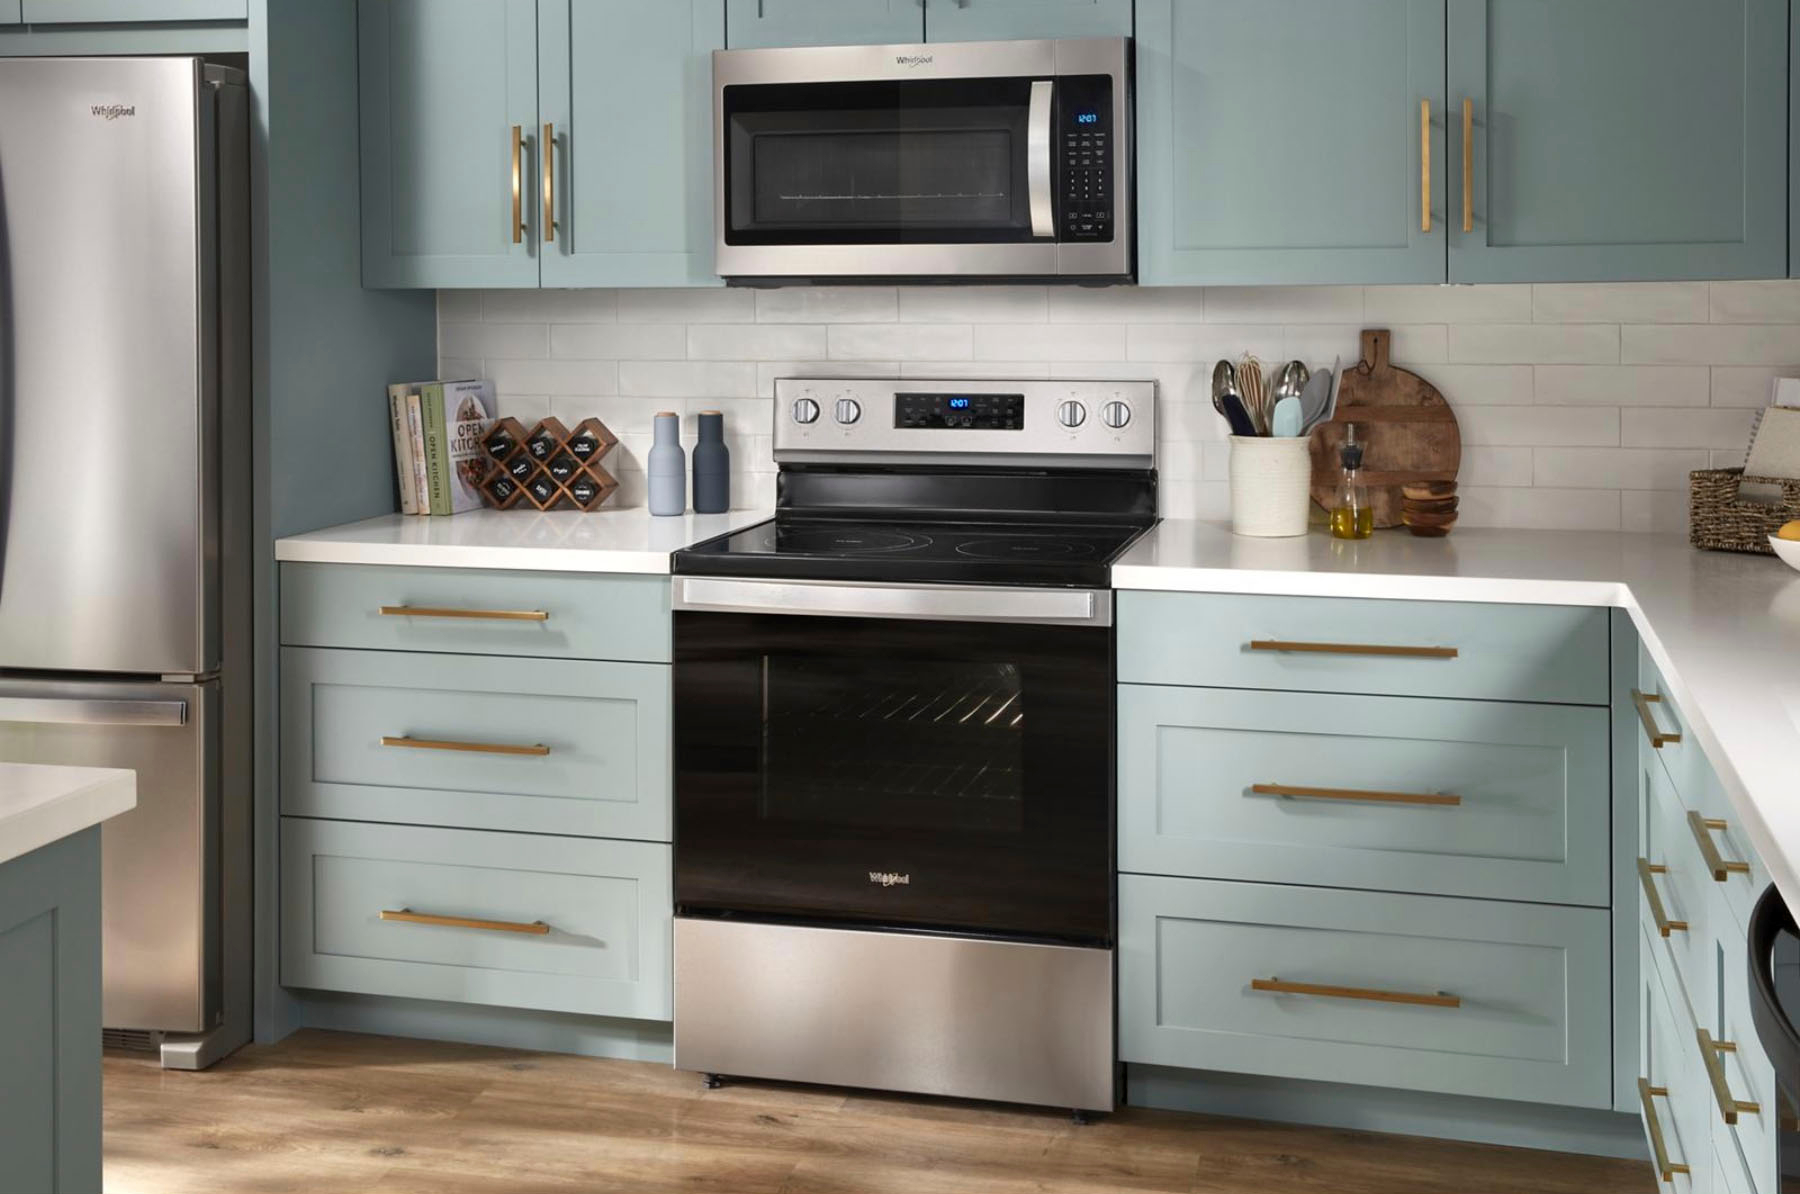 Whirlpool WFE550S0LZ 5.3 CuFt Freestanding 5-Burner Convection Electric  Range In Stainless Steel With Air Fry